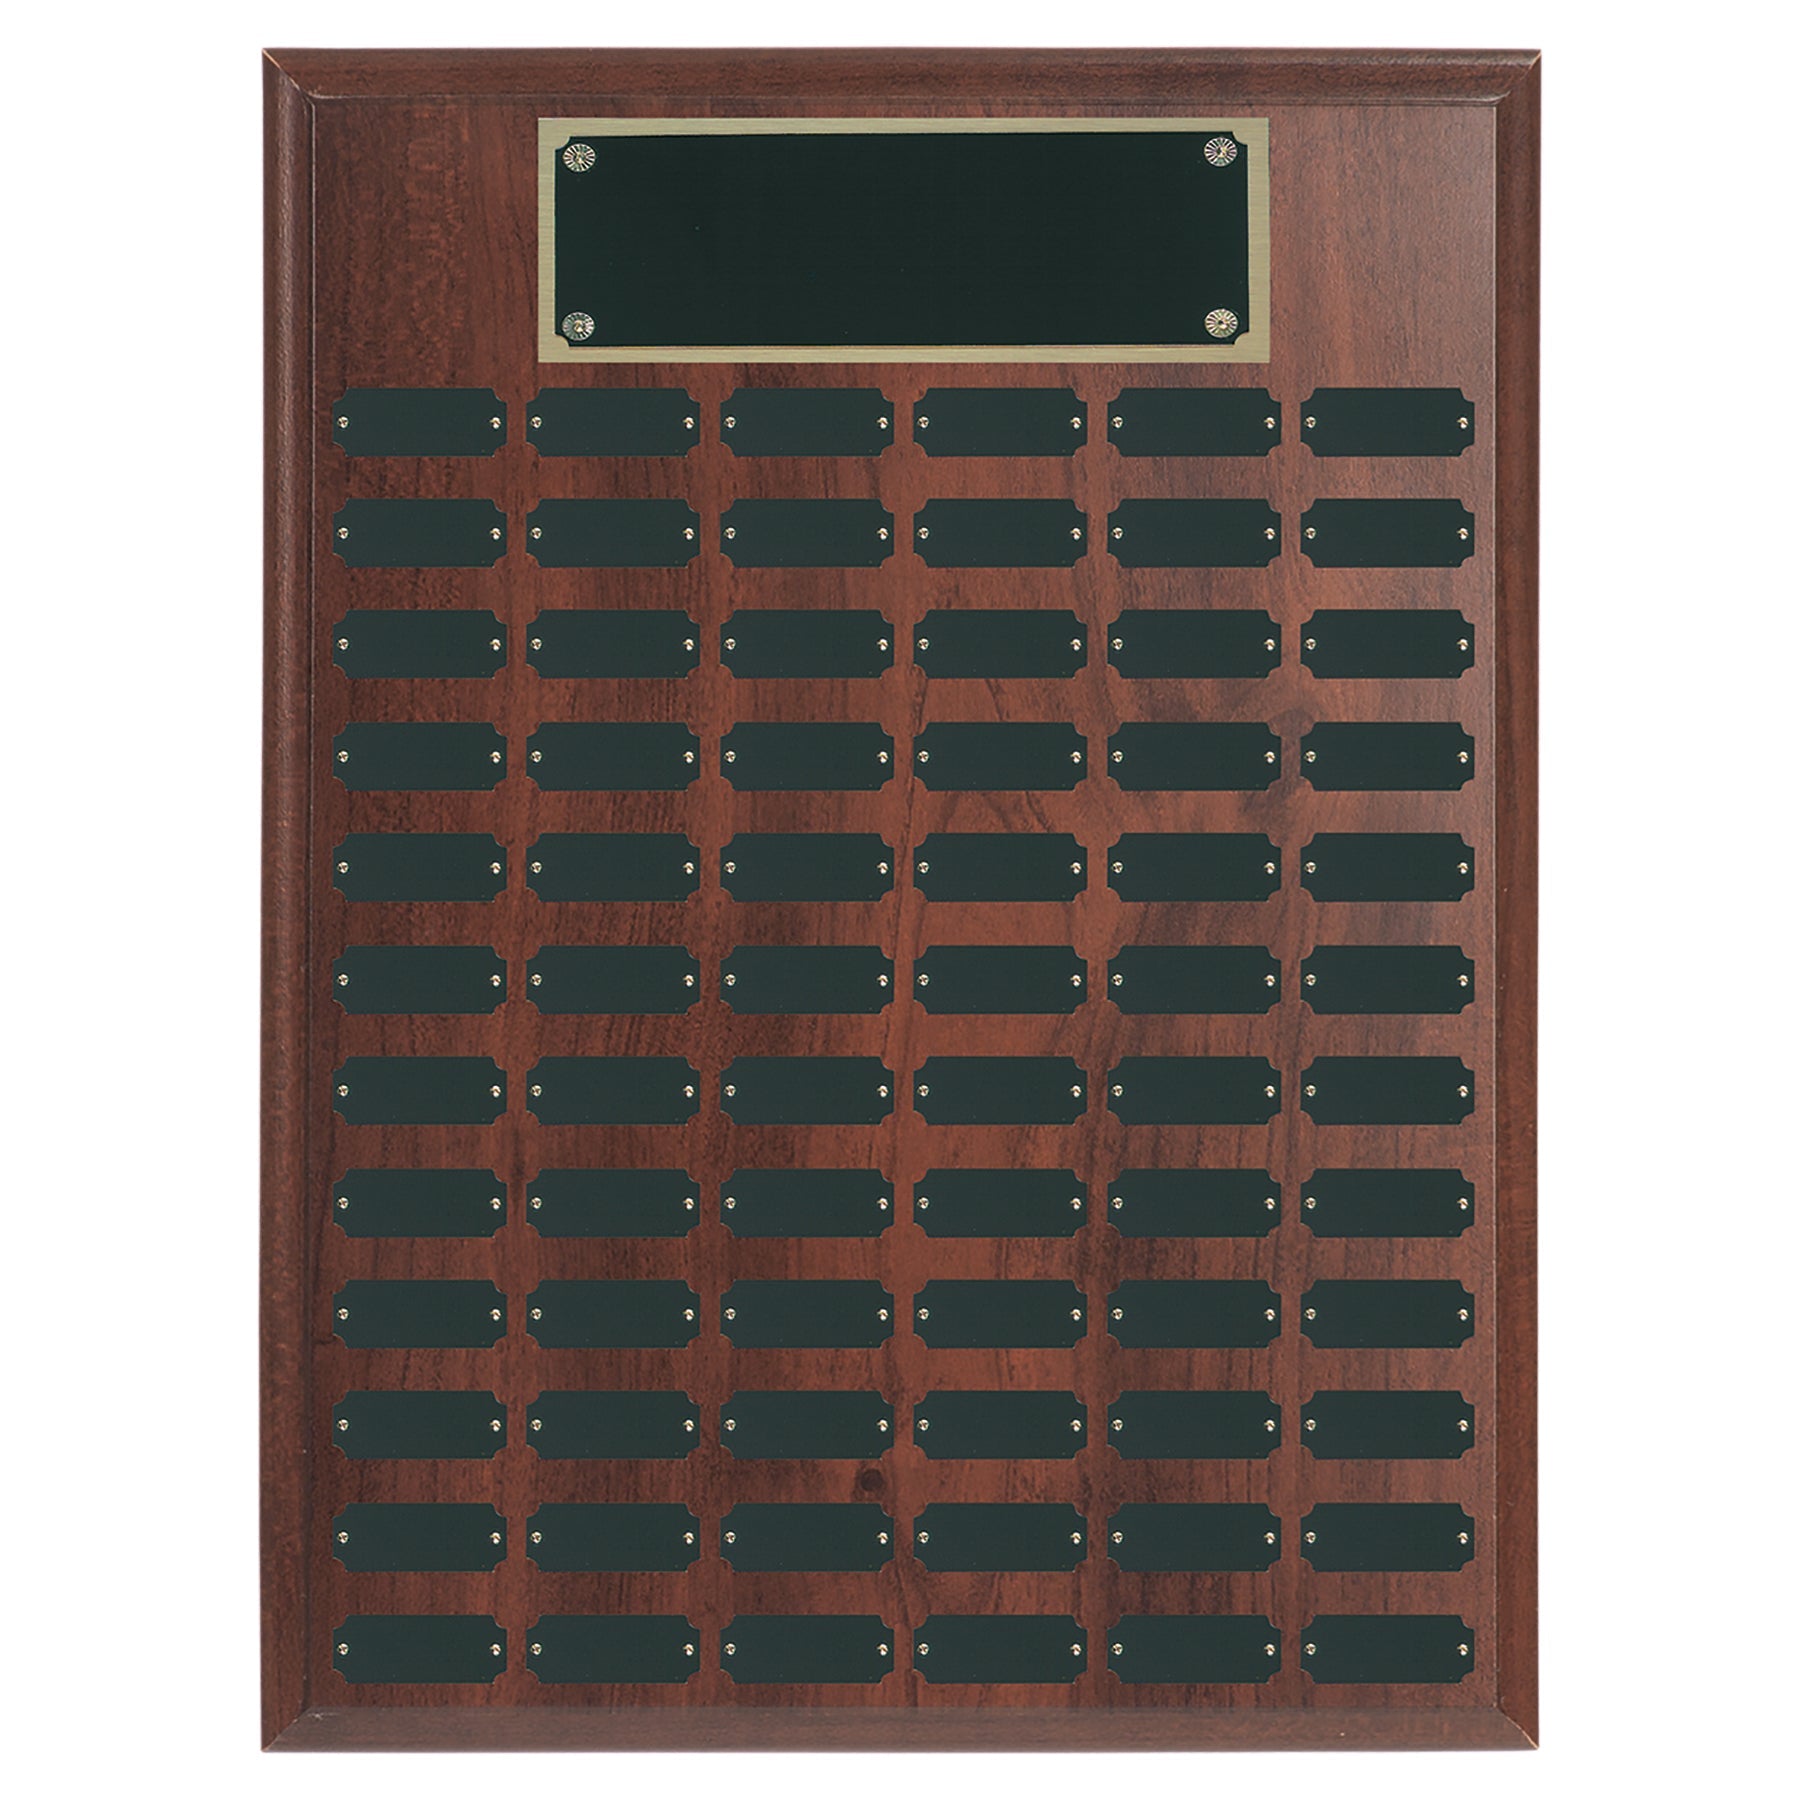 Walnut Completed Perpetual Plaque, 72 Plate, Laser Engraved Perpetual Plaque Craftworks NW 